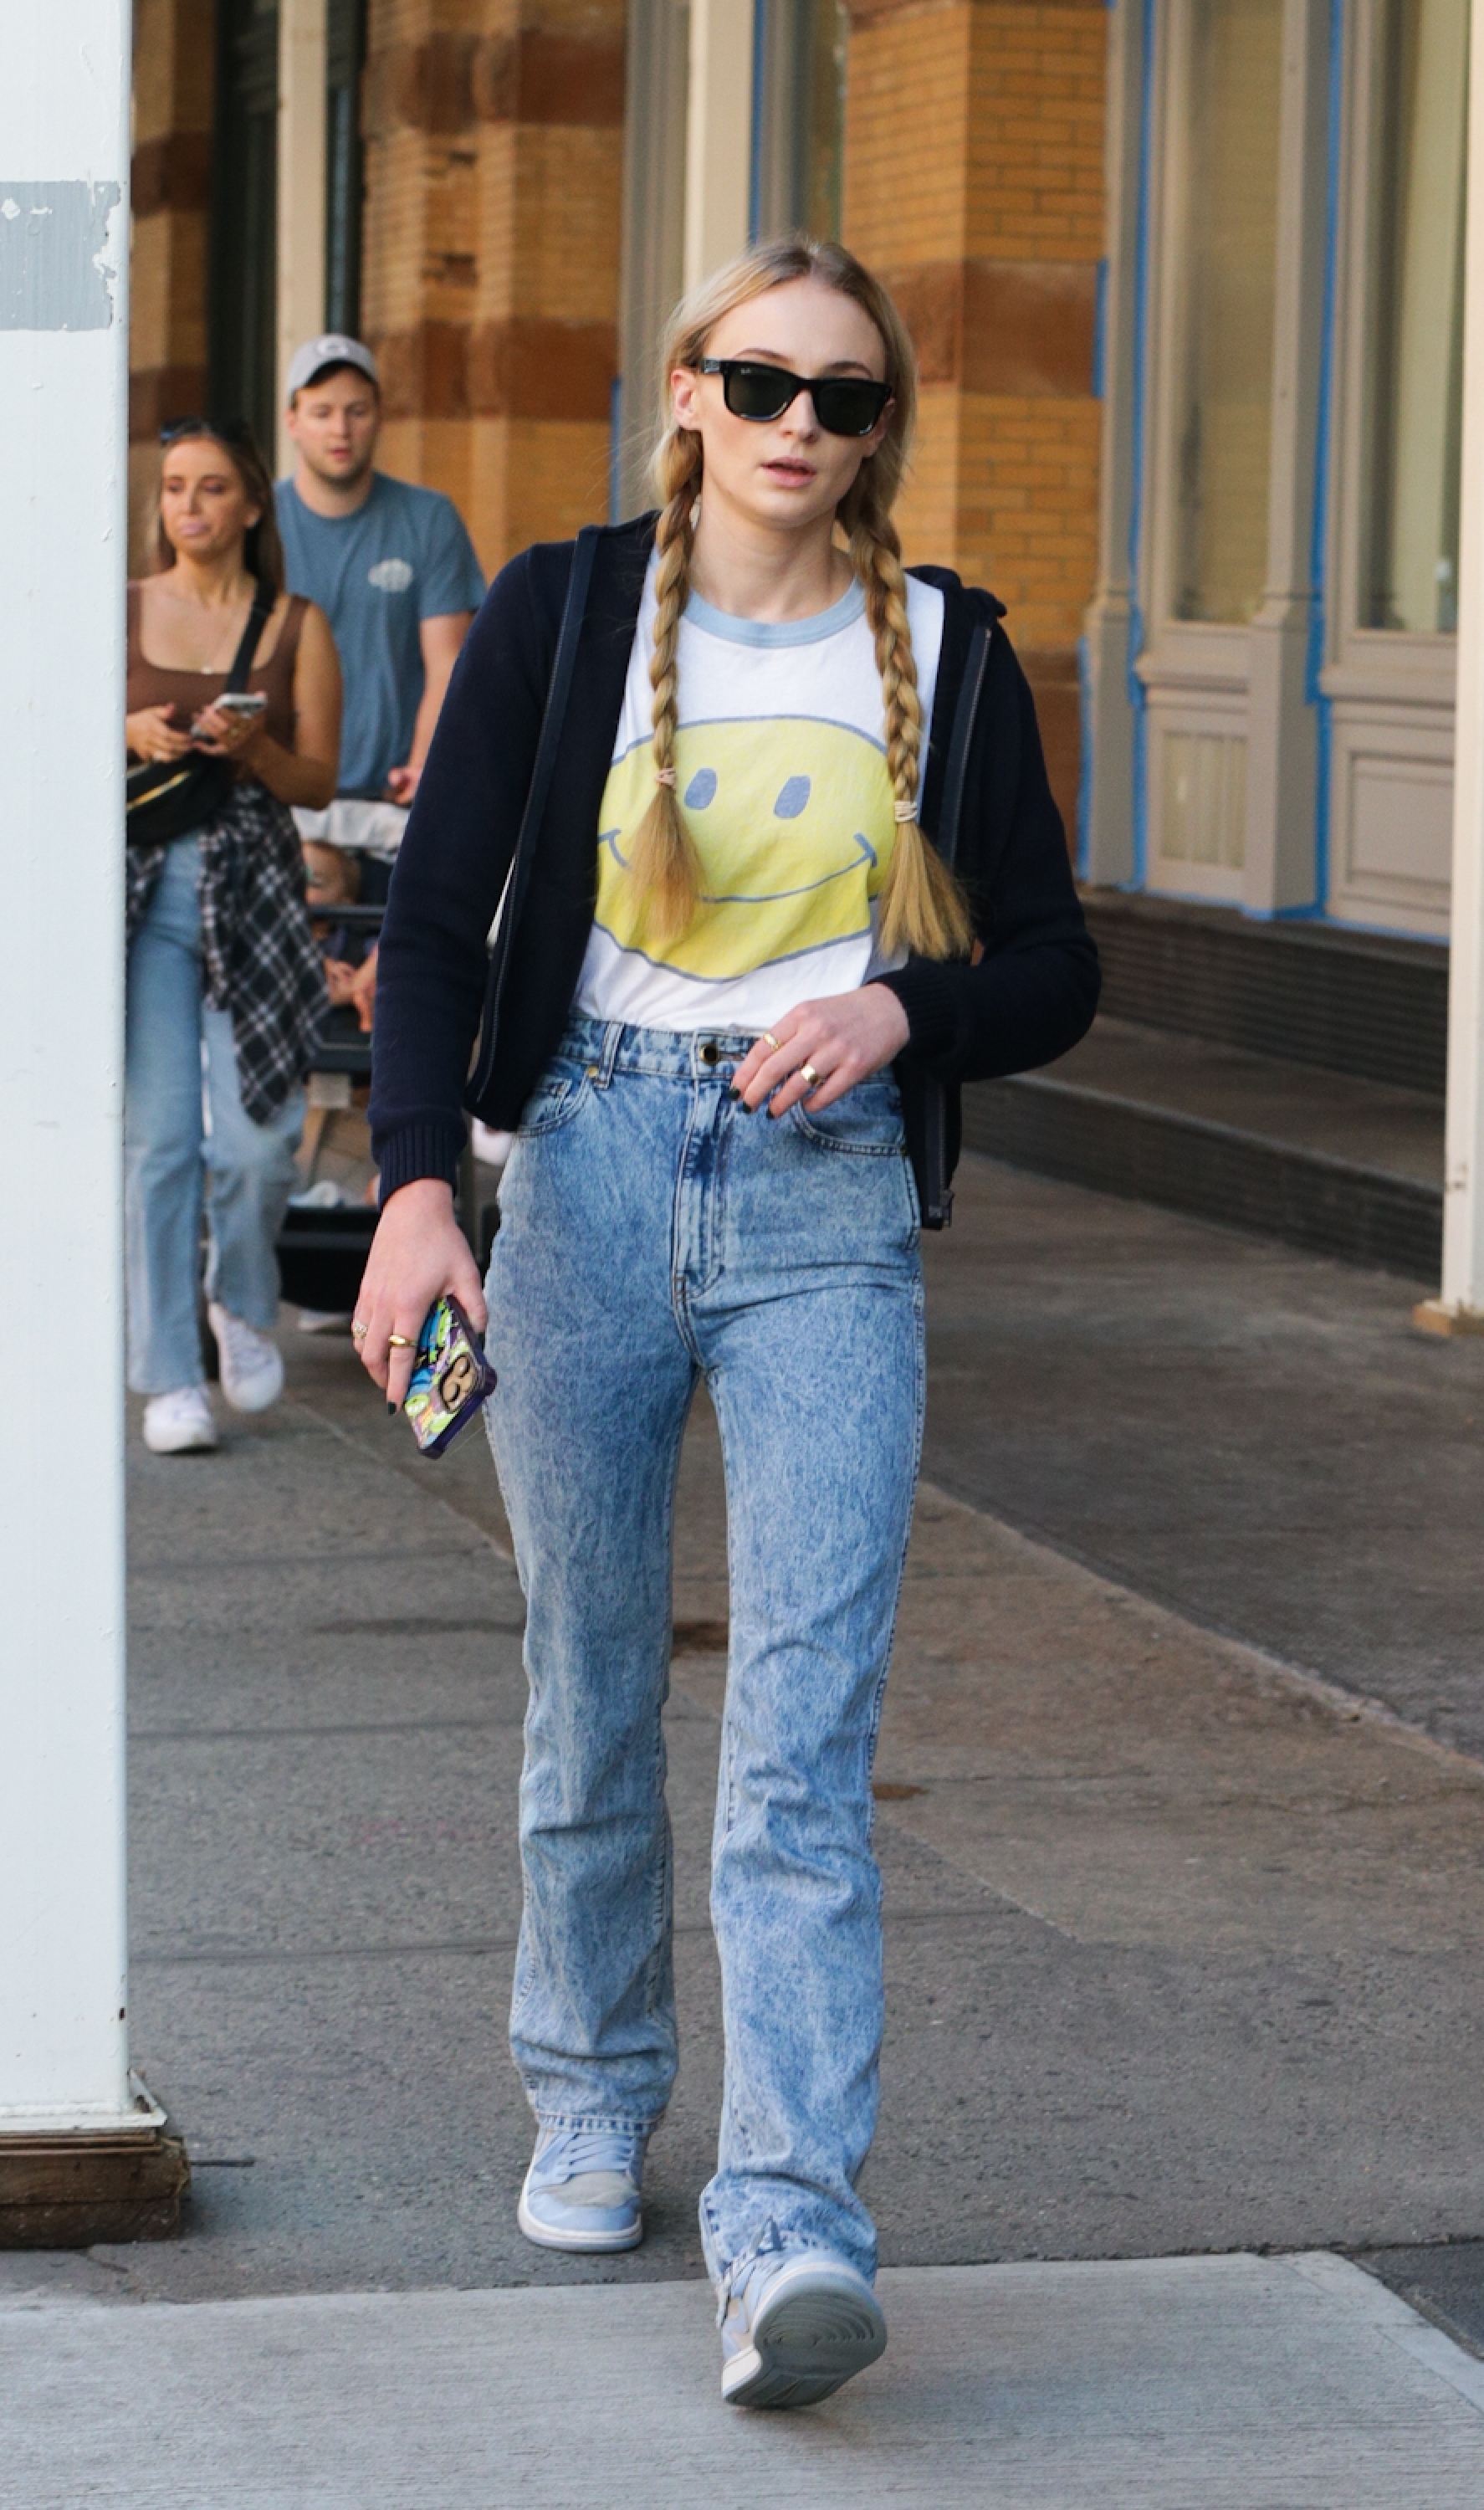 Sophie Turner in casual attire with braided hair, graphic tee, jeans, and sneakers walks on a sidewalk